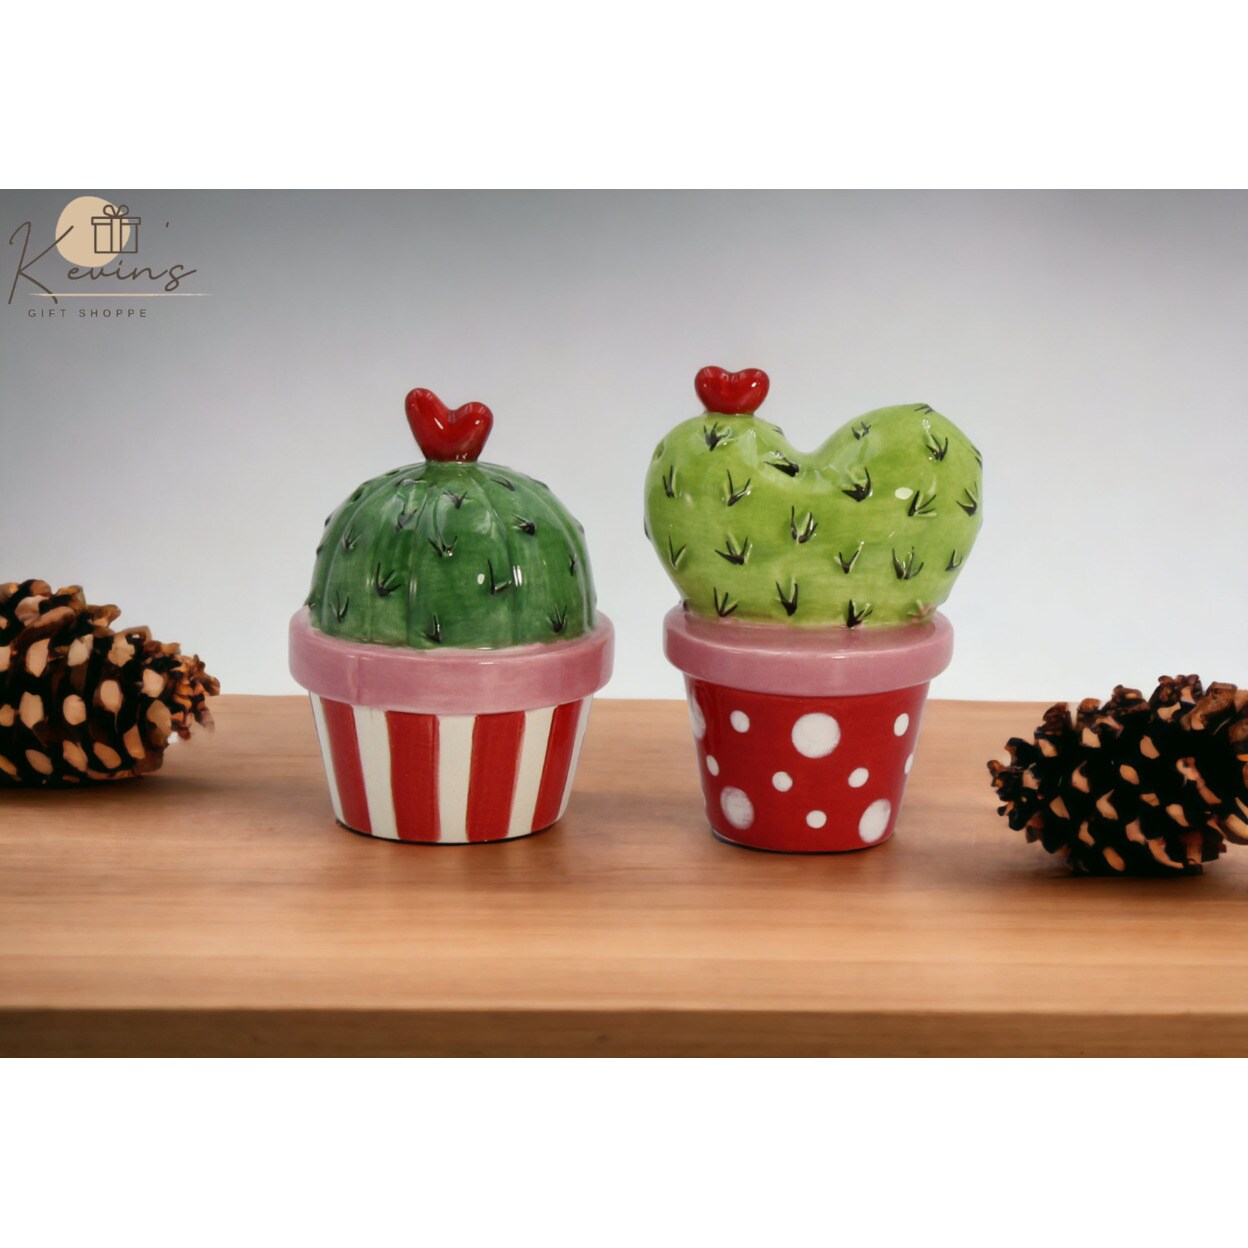 kevinsgiftshoppe Ceramic Cactus in Pots with Heart Salt and Pepper Shakers Valentines Day Decor   Kitchen Decor